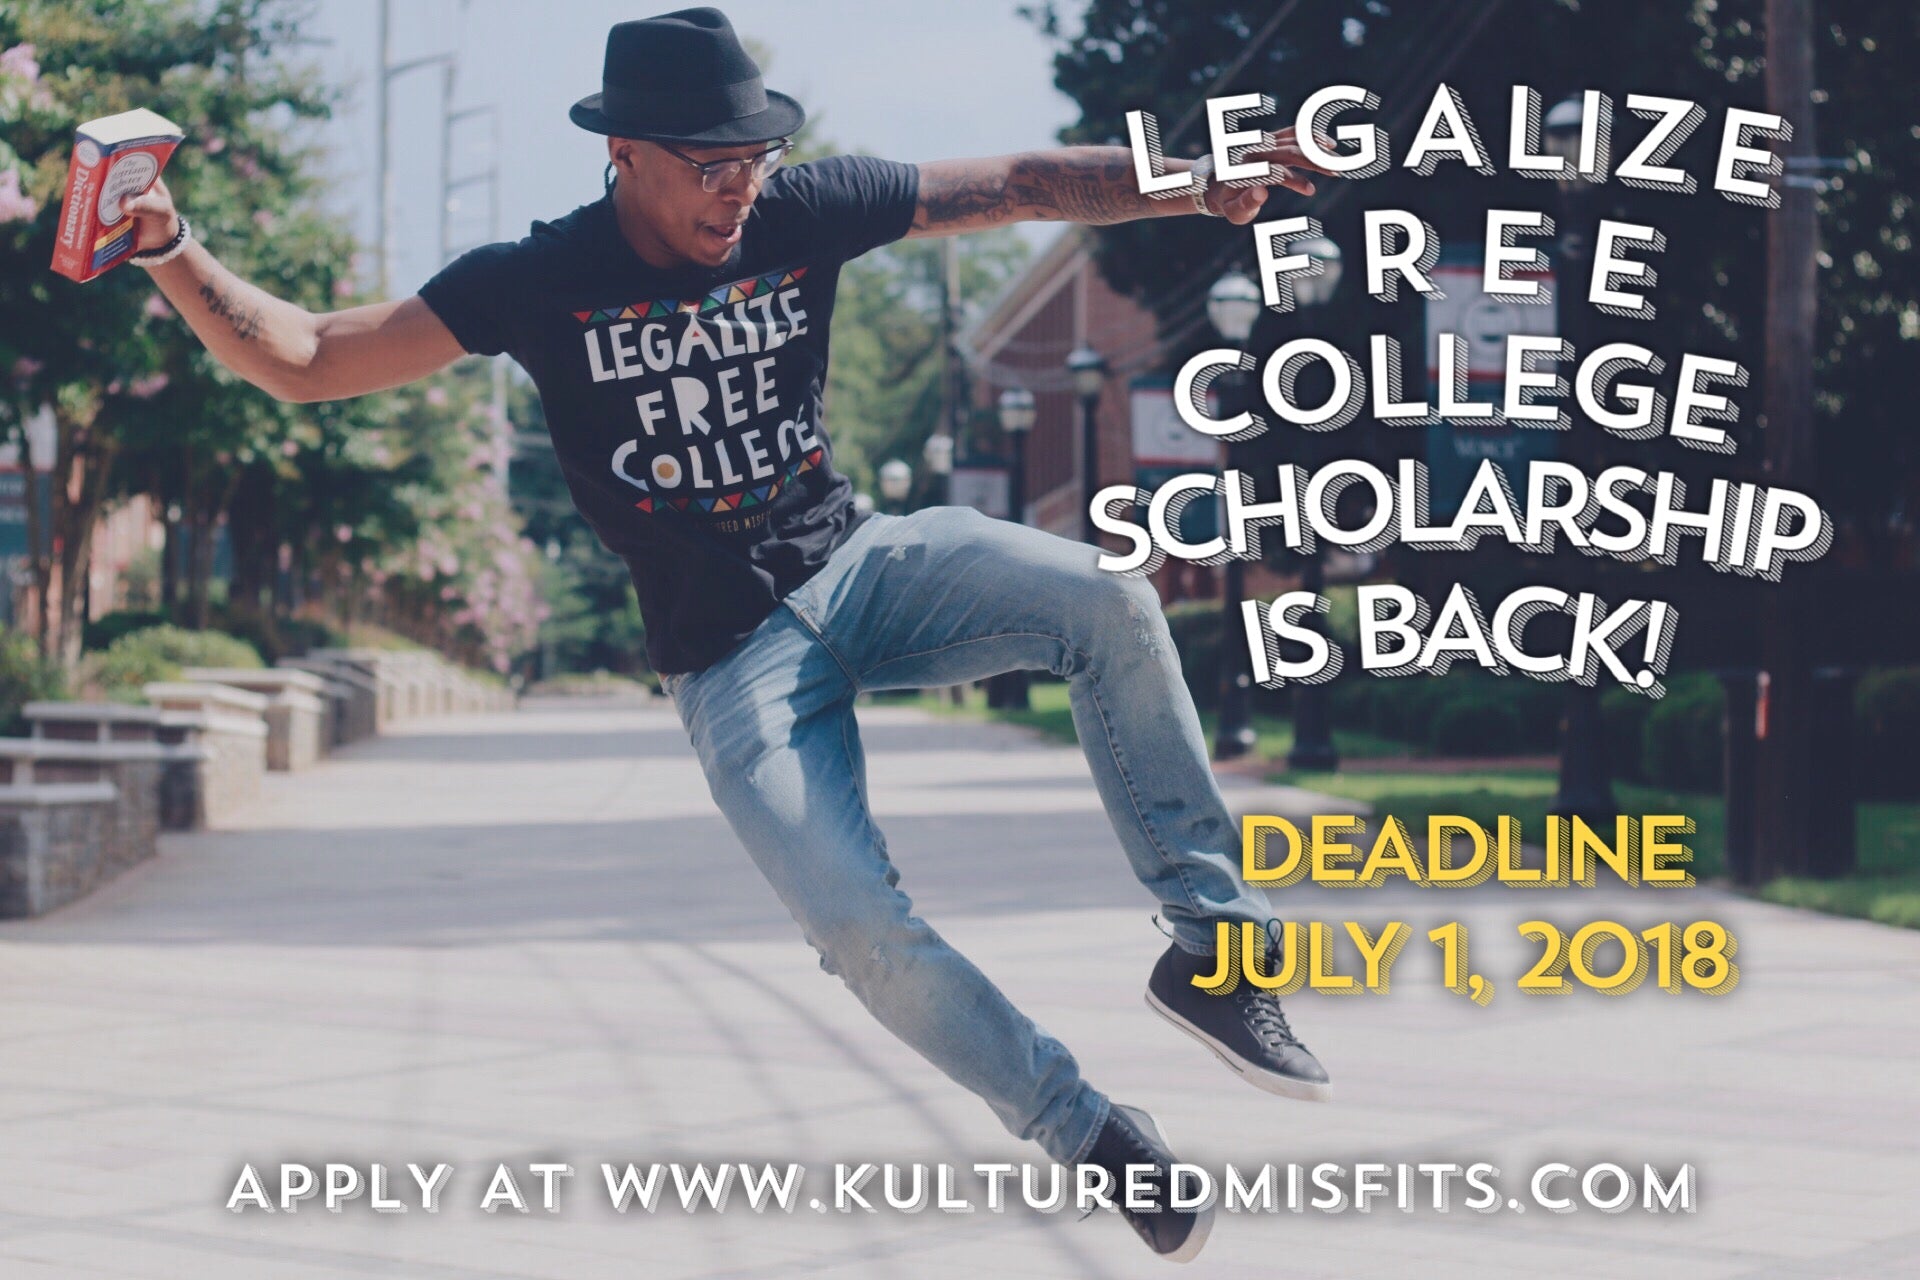 "Legalize Free College" Scholarship Is Back!